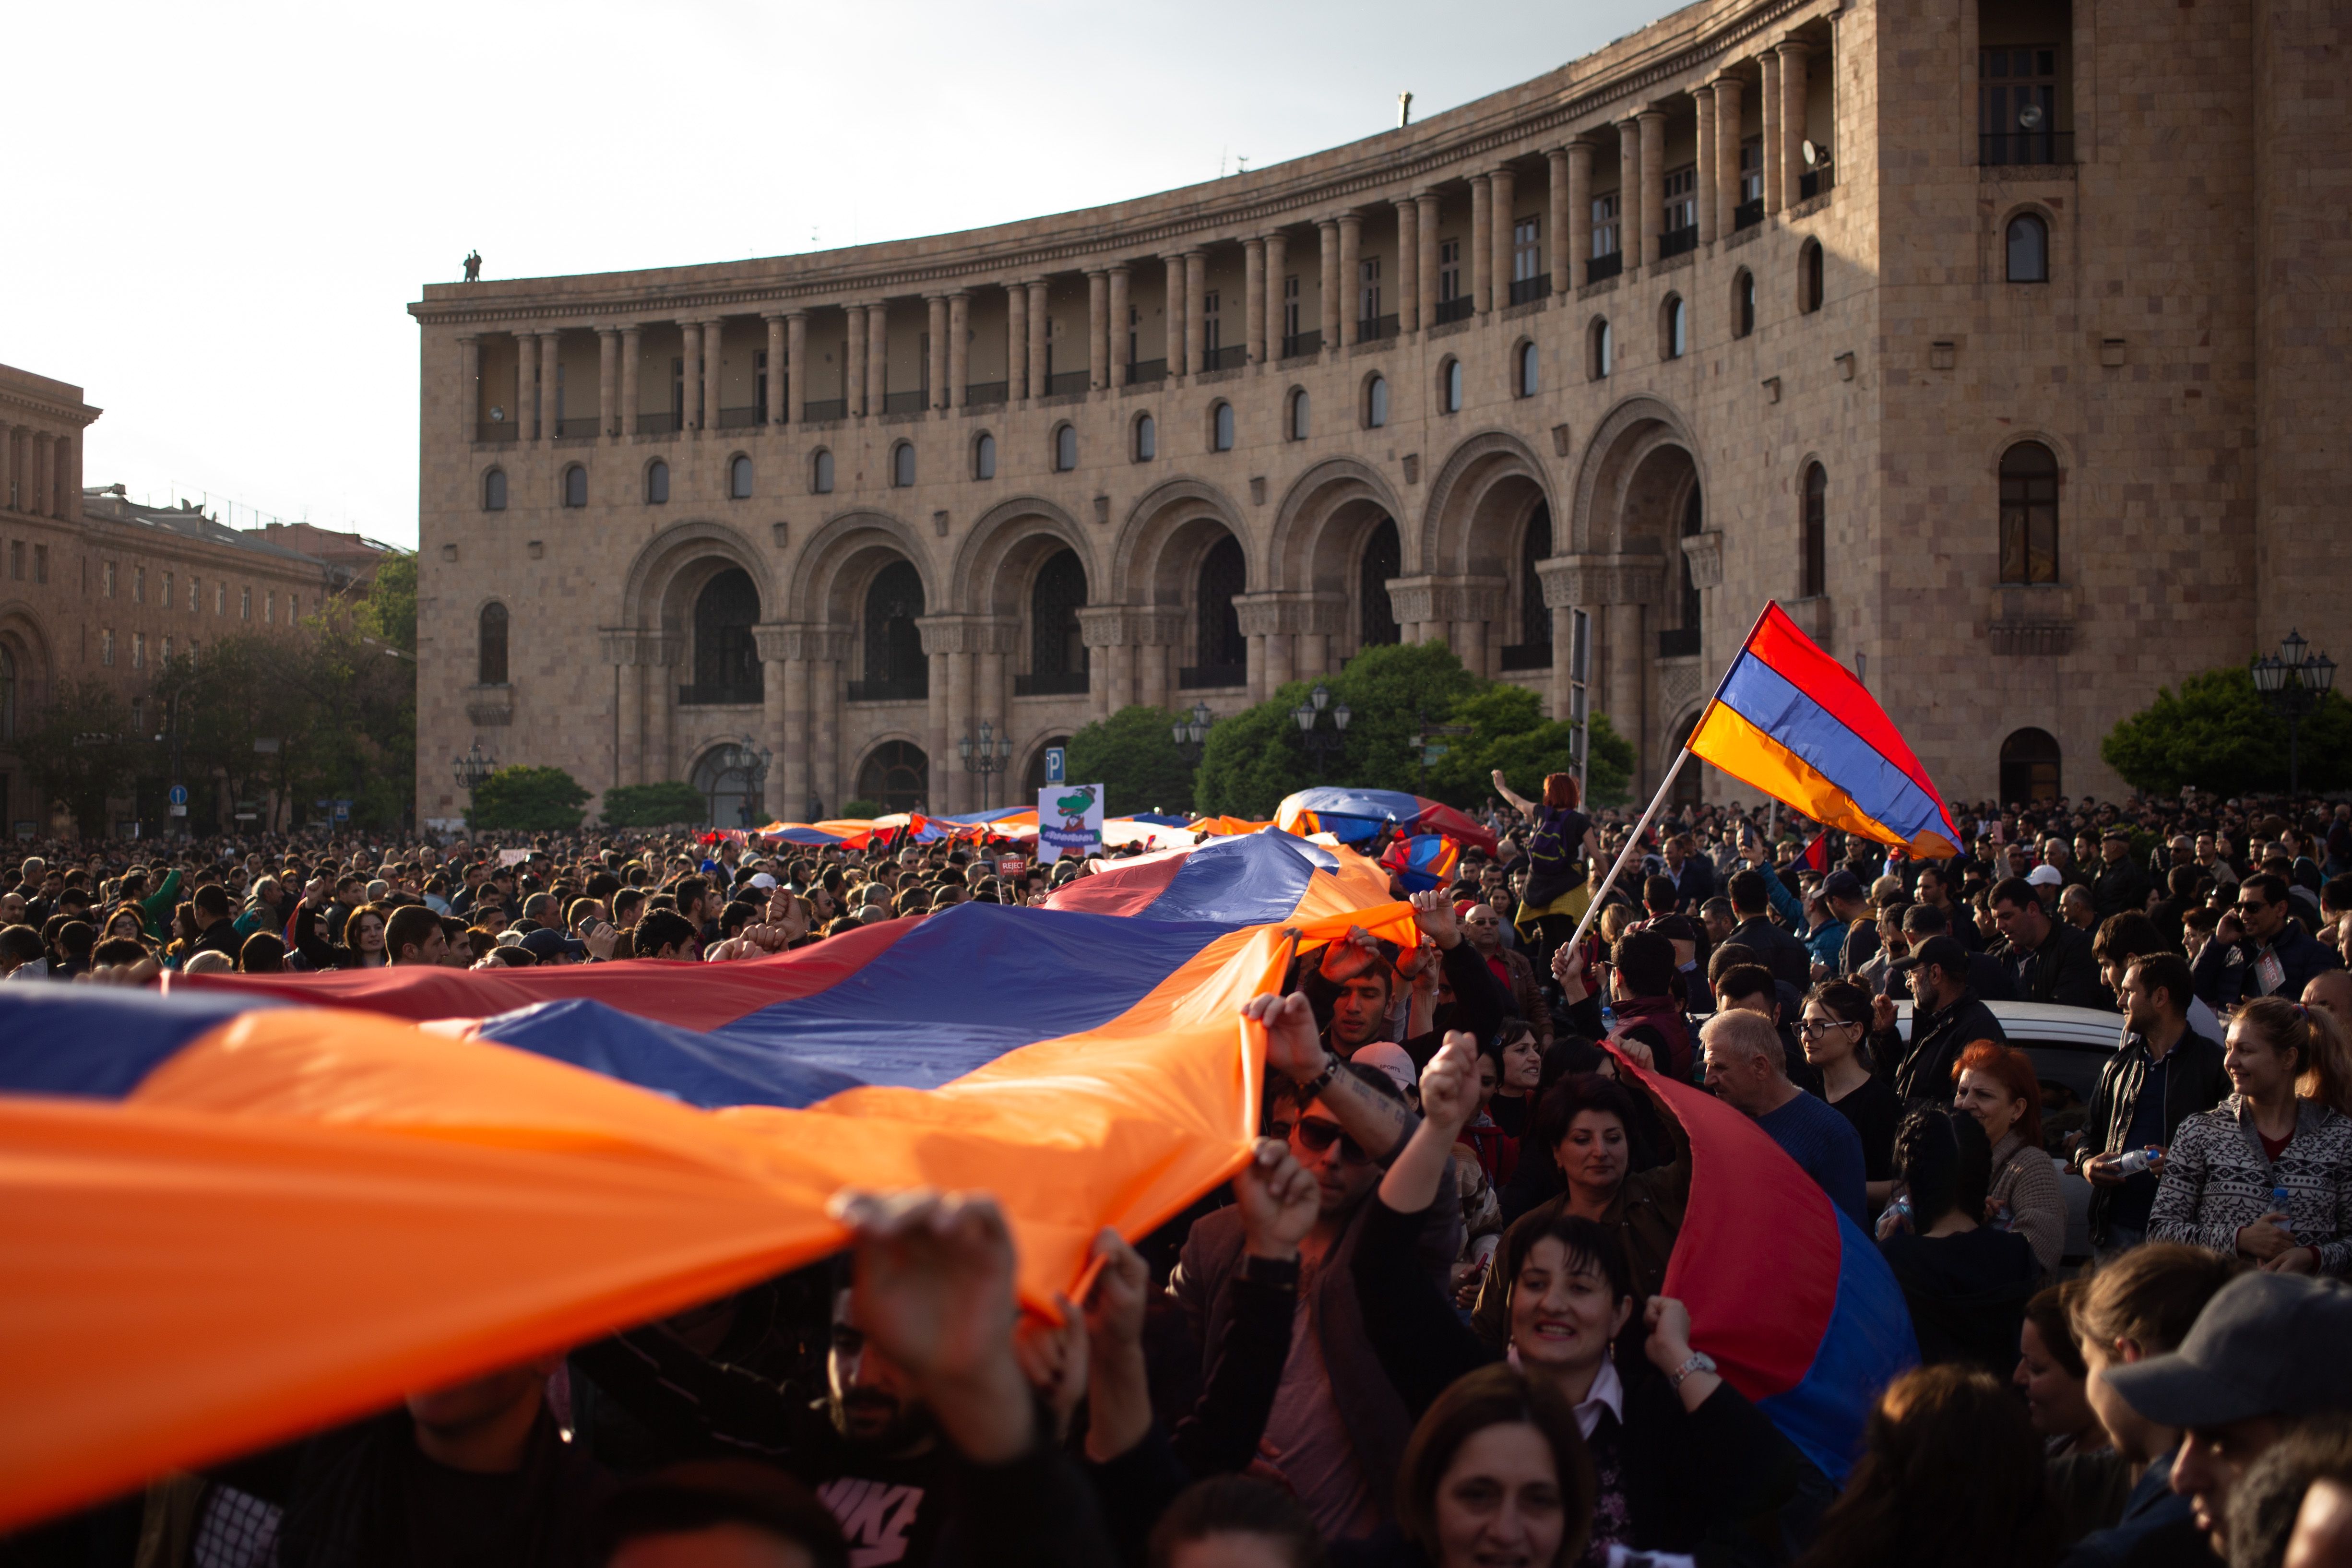 Protesters holding an Armenian flag on Yerevan's Republic Square during a rally in 2018. Image by Kacper Kawecki / Shutterstock. Armenia, 2018.